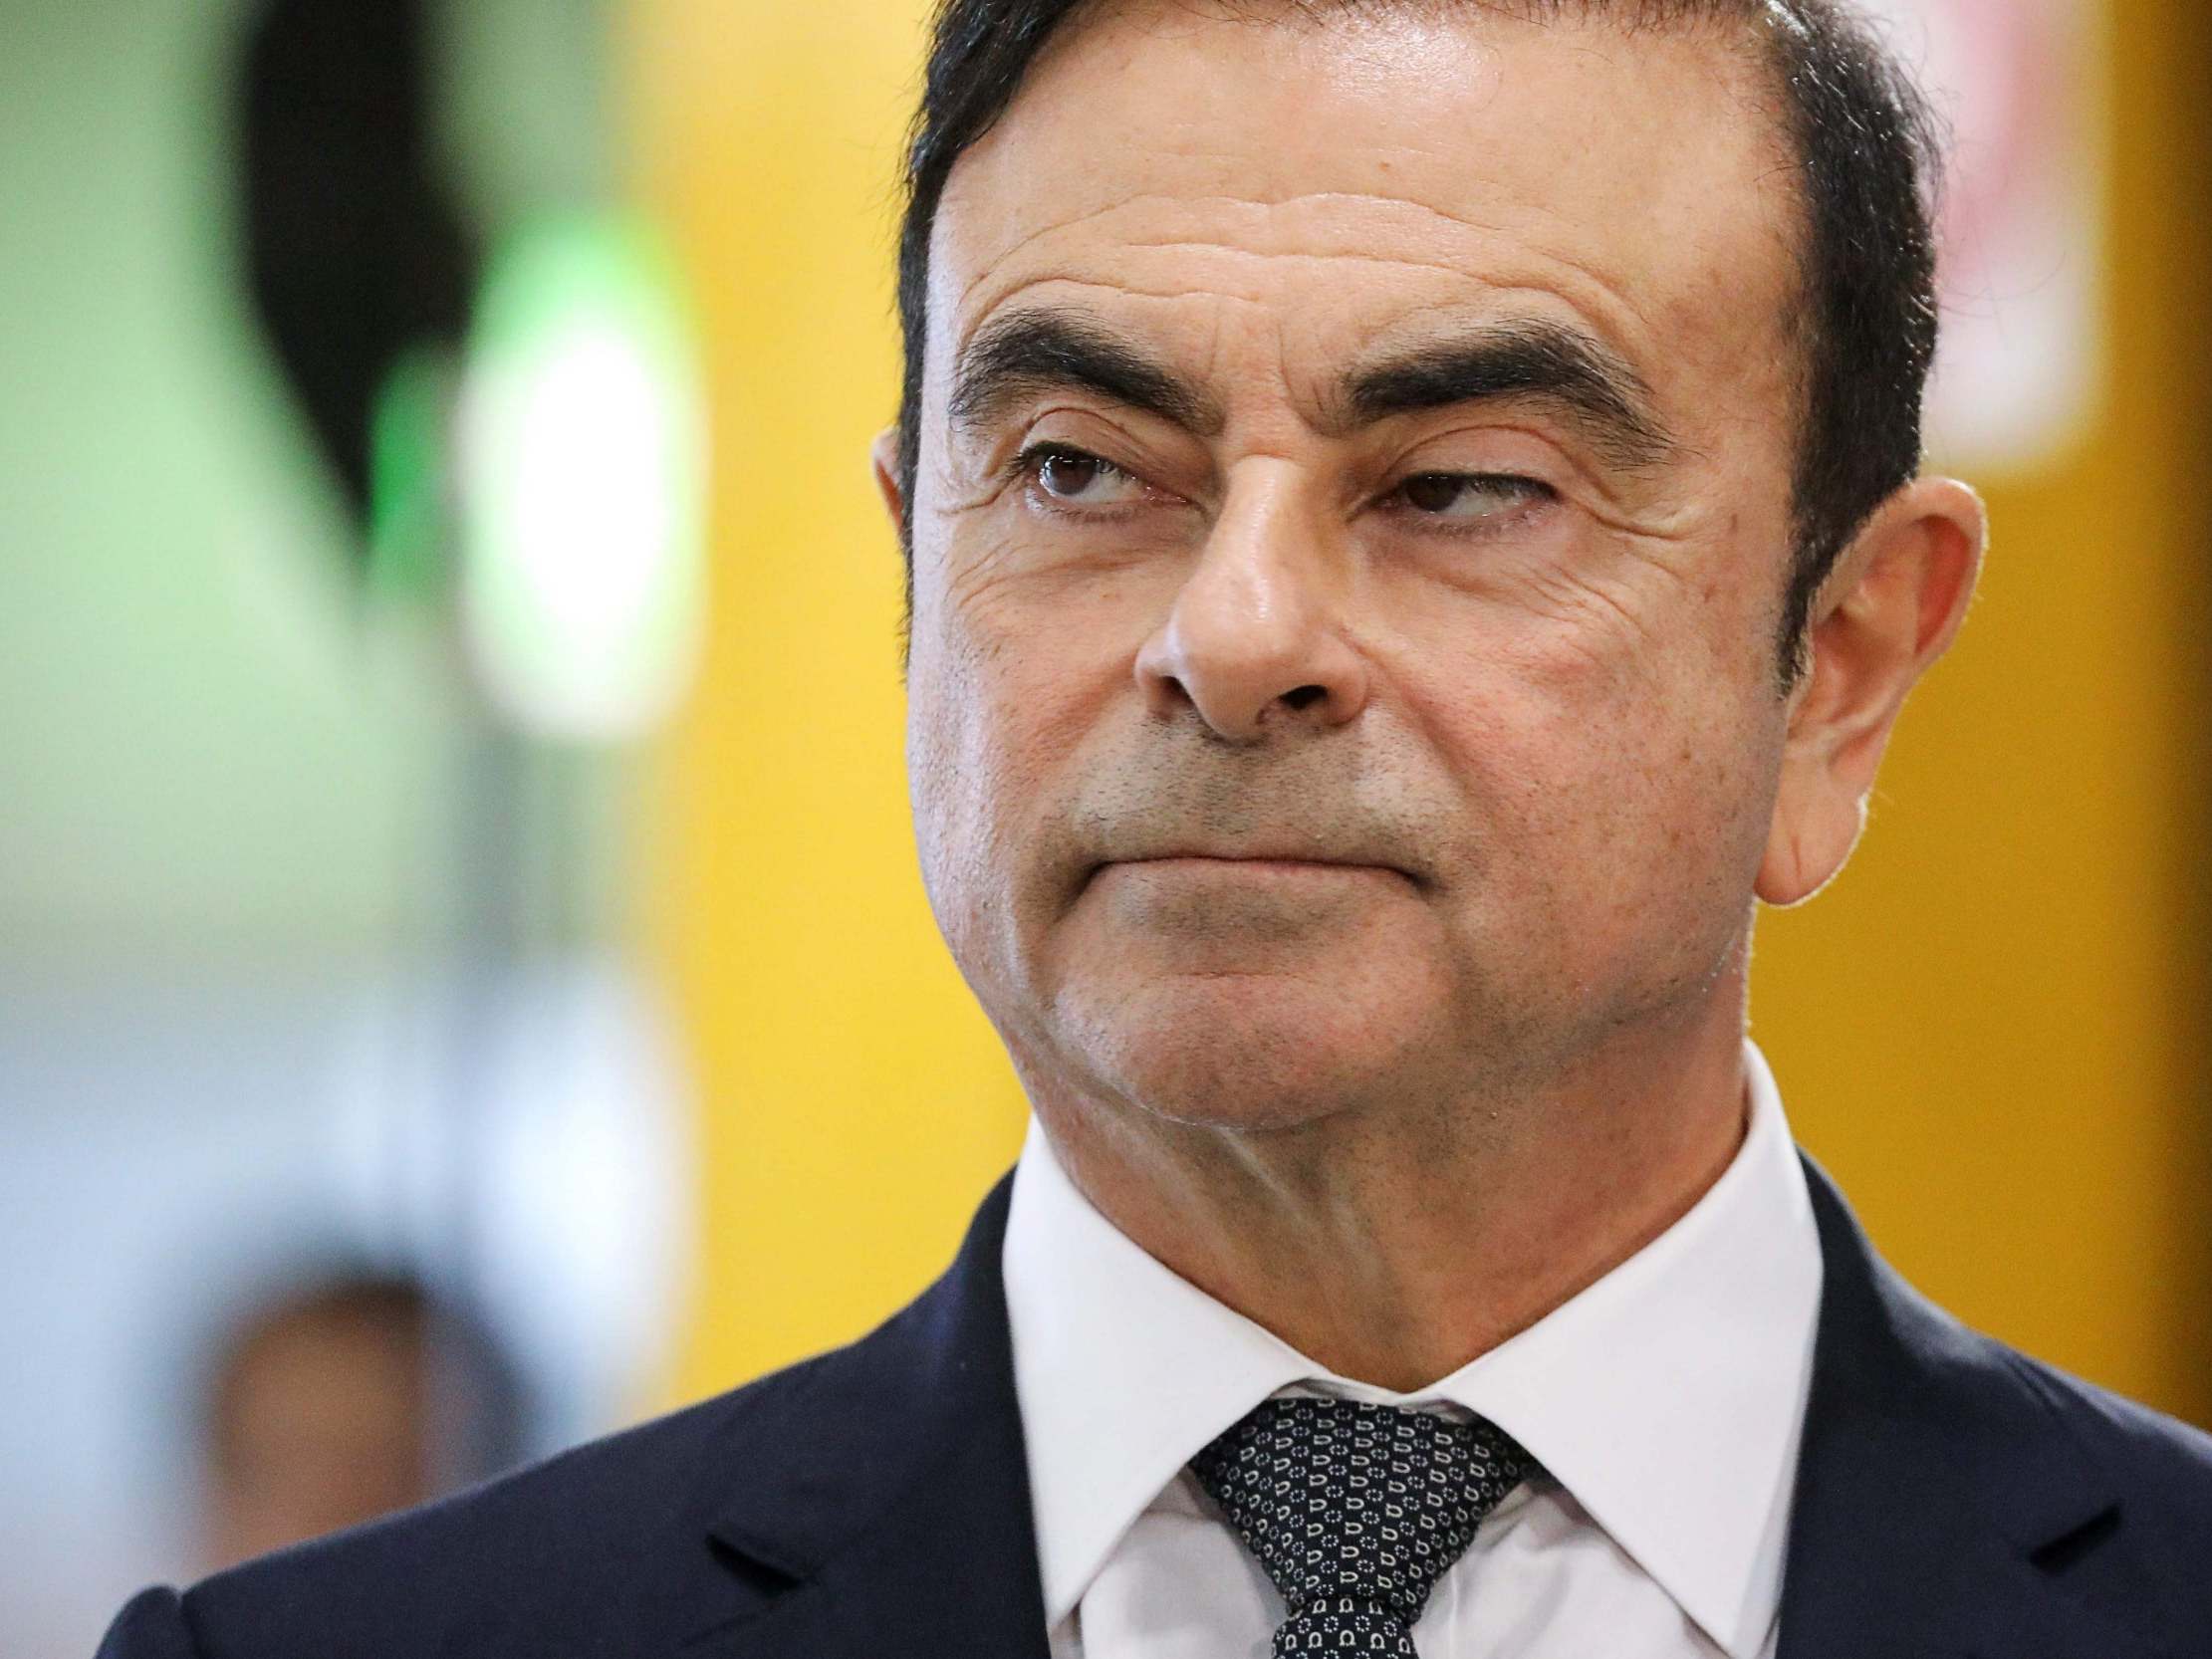 It is unclear how Carlos Ghosn was able to leave Japan, where he was under house arrest as he awaited trial